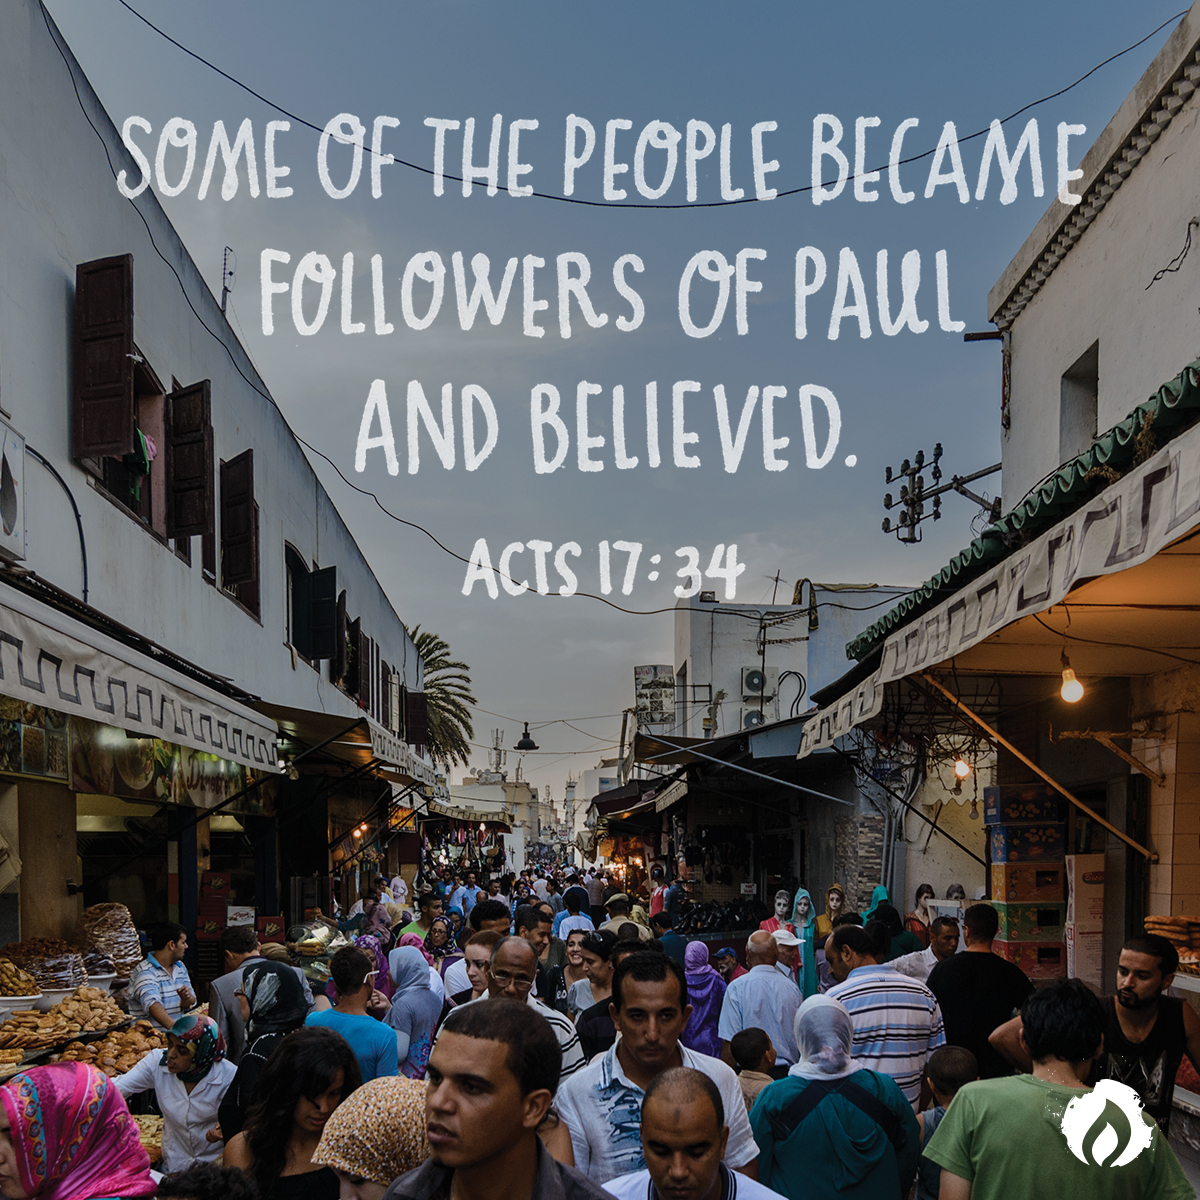 Acts 17:34